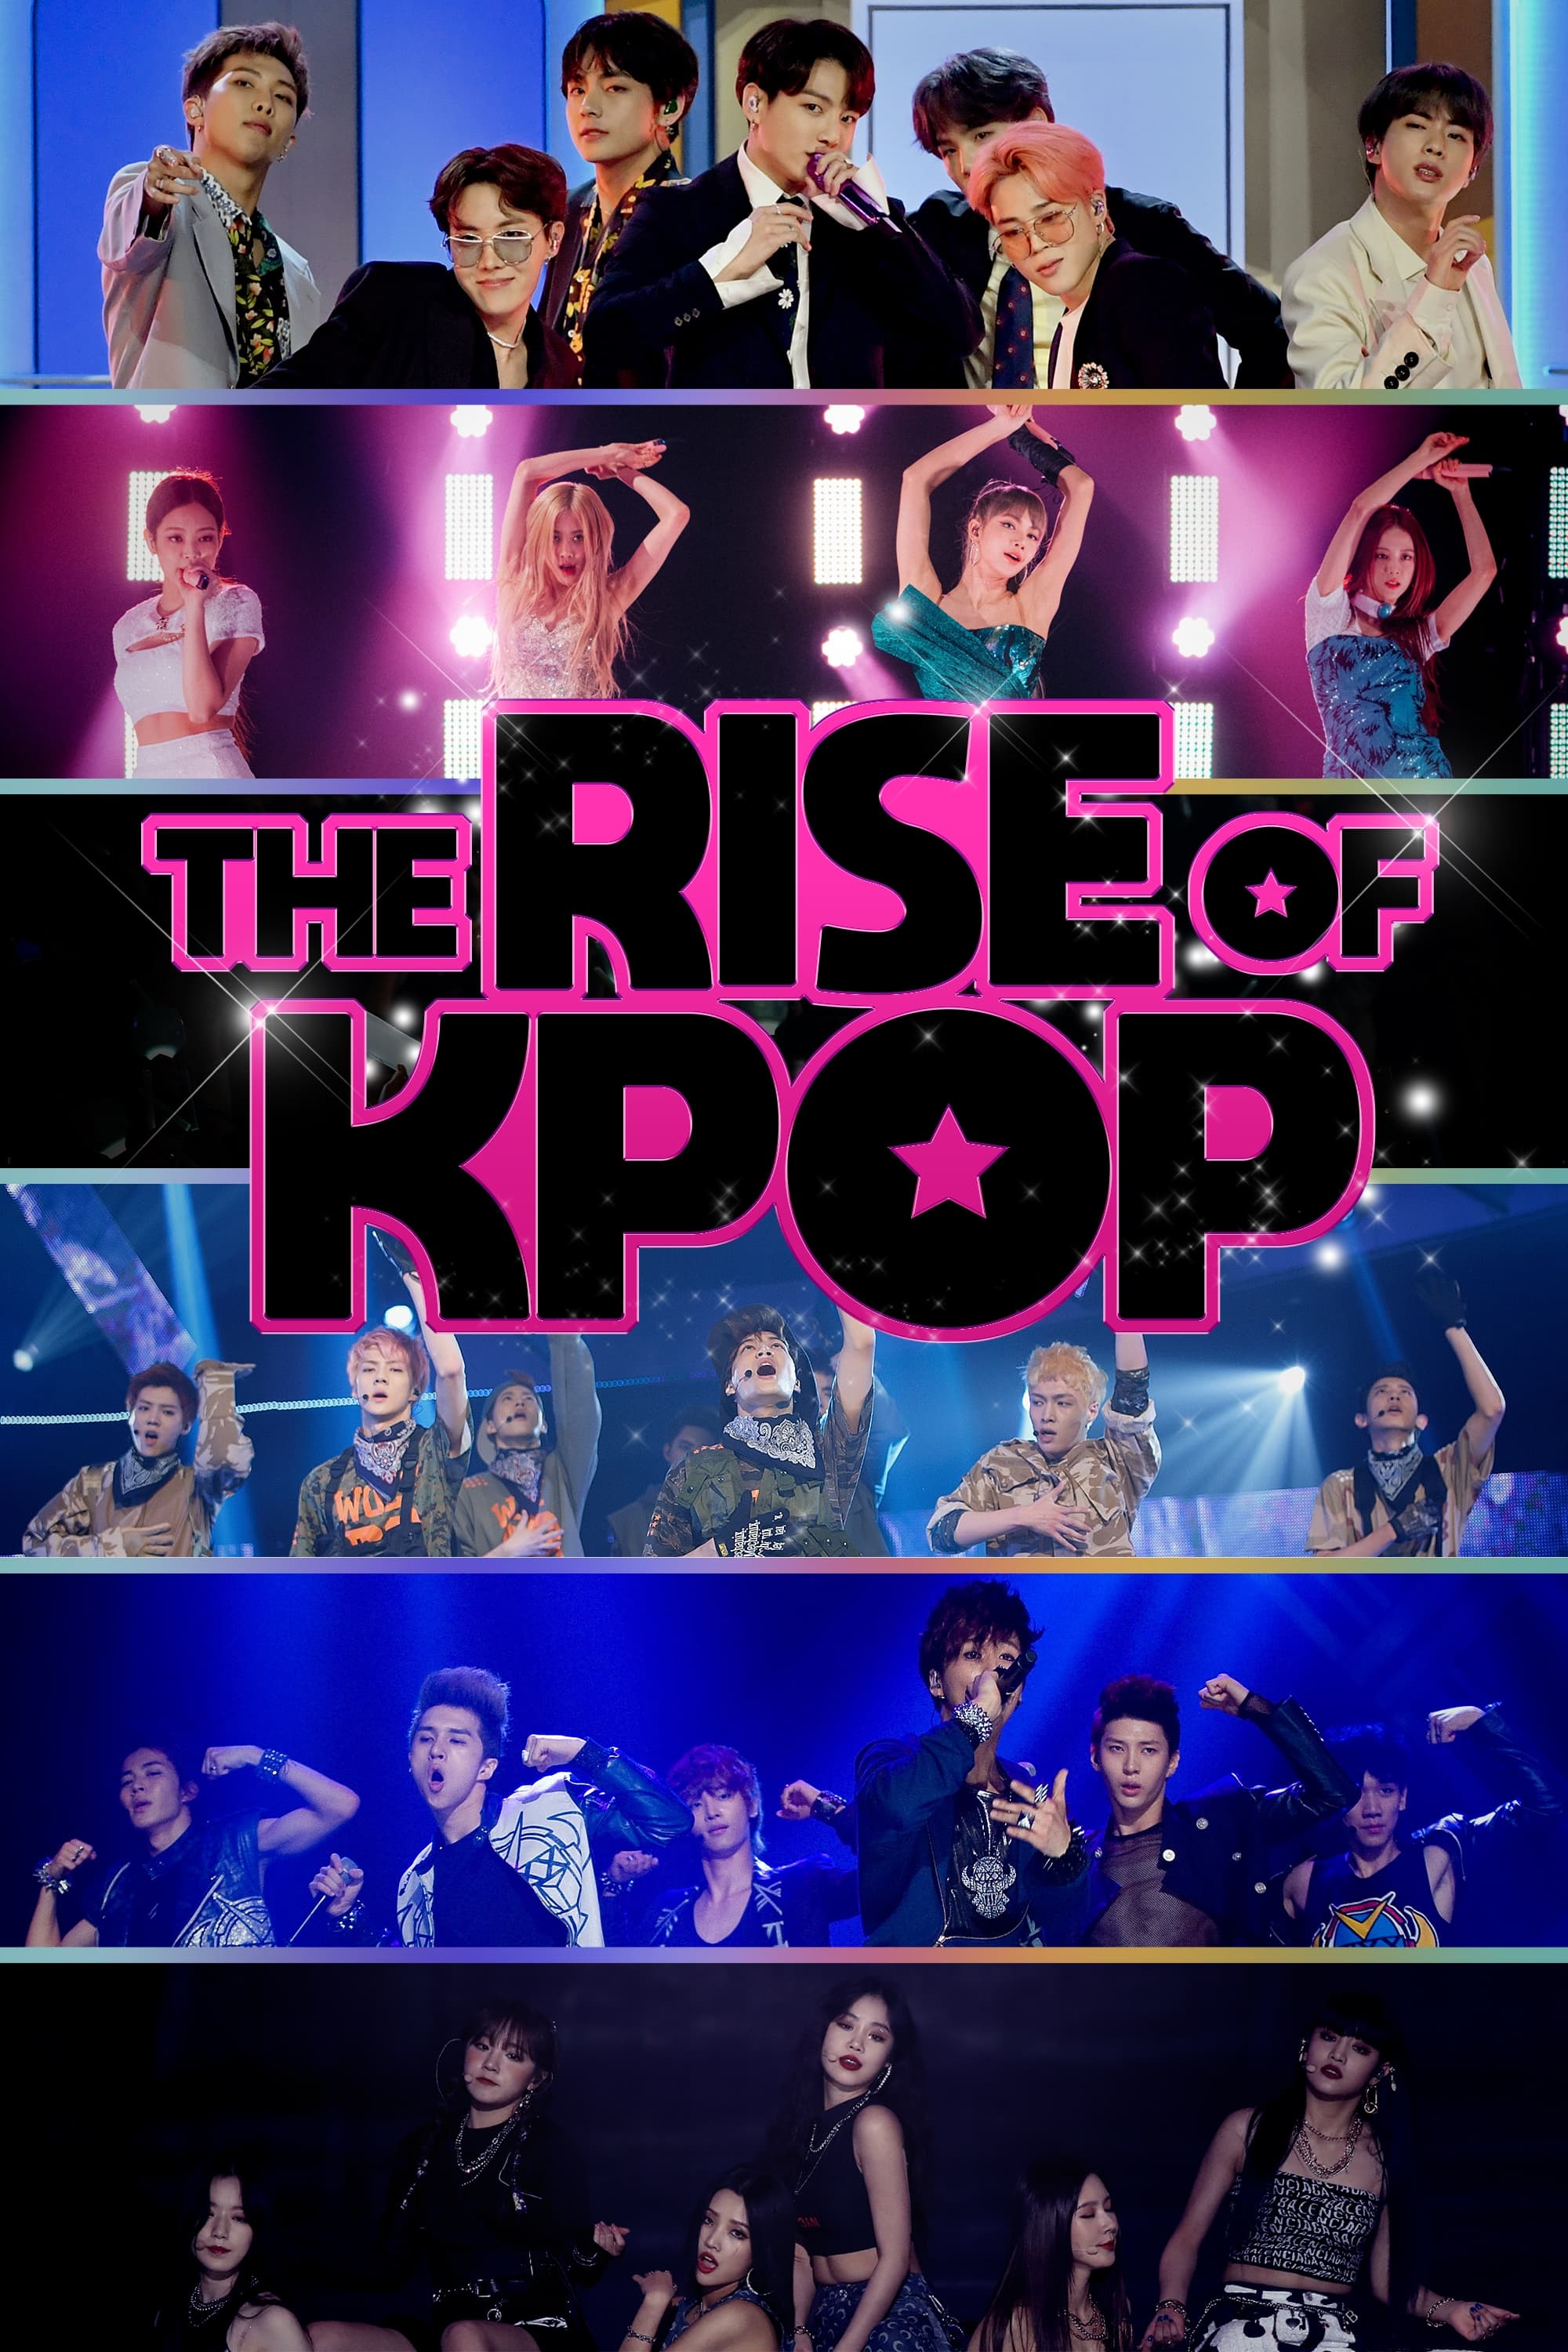 The Rise of K-Pop